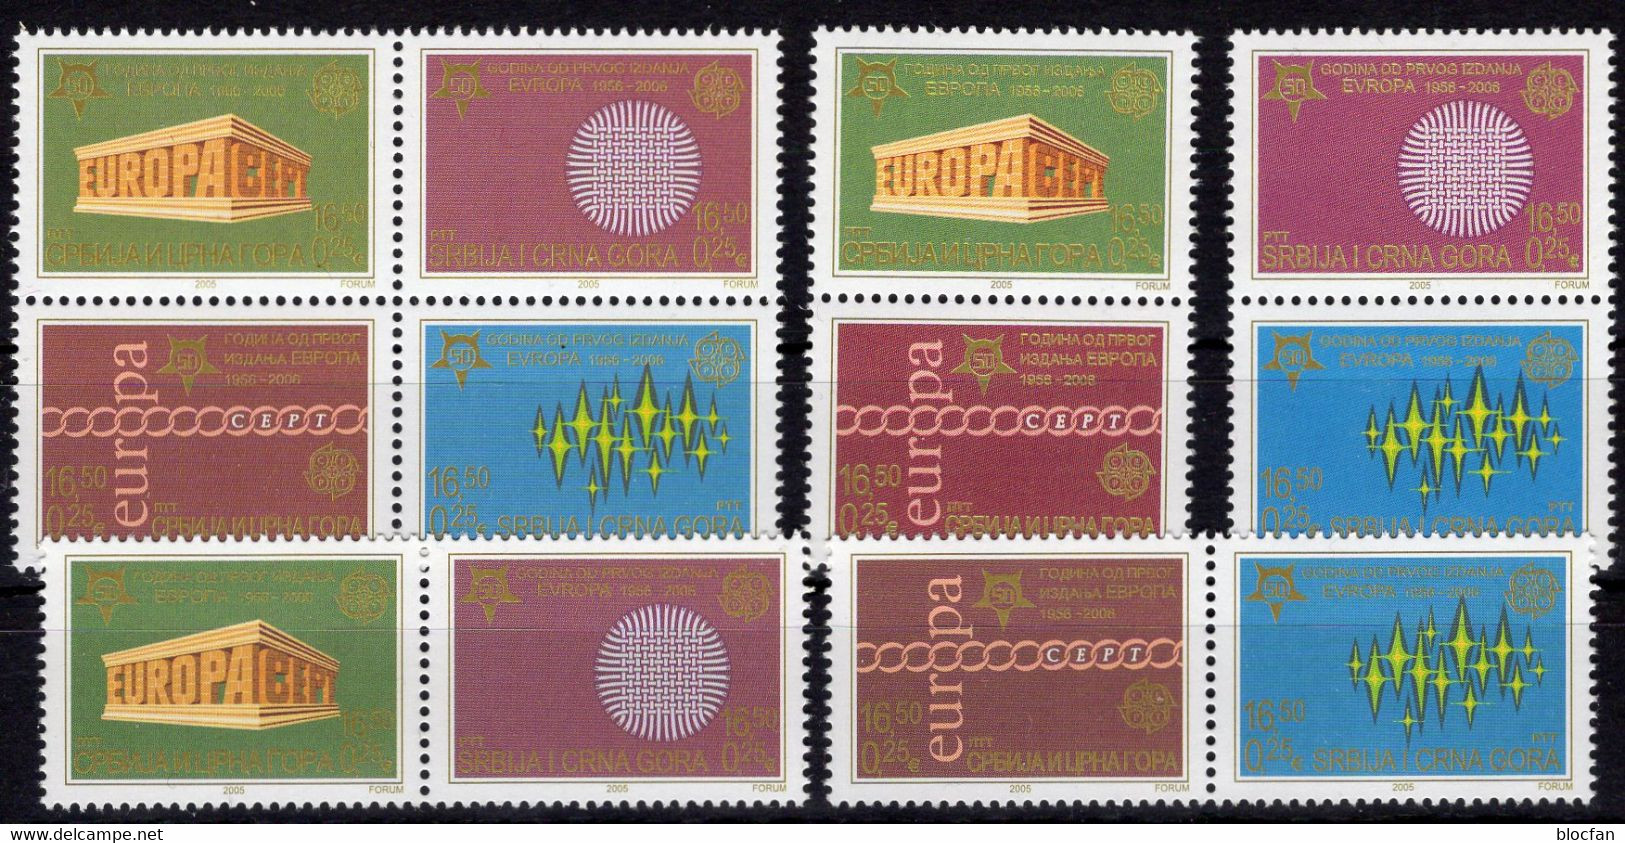 CEPT 2006 Serbia 4ZD+4-Block A ** 24€ Stamps On Stamp YU1361 1380 1417 1457 Bloc Hoja Bloque Ms Se-tenant Bf EUROPA - Colecciones & Series